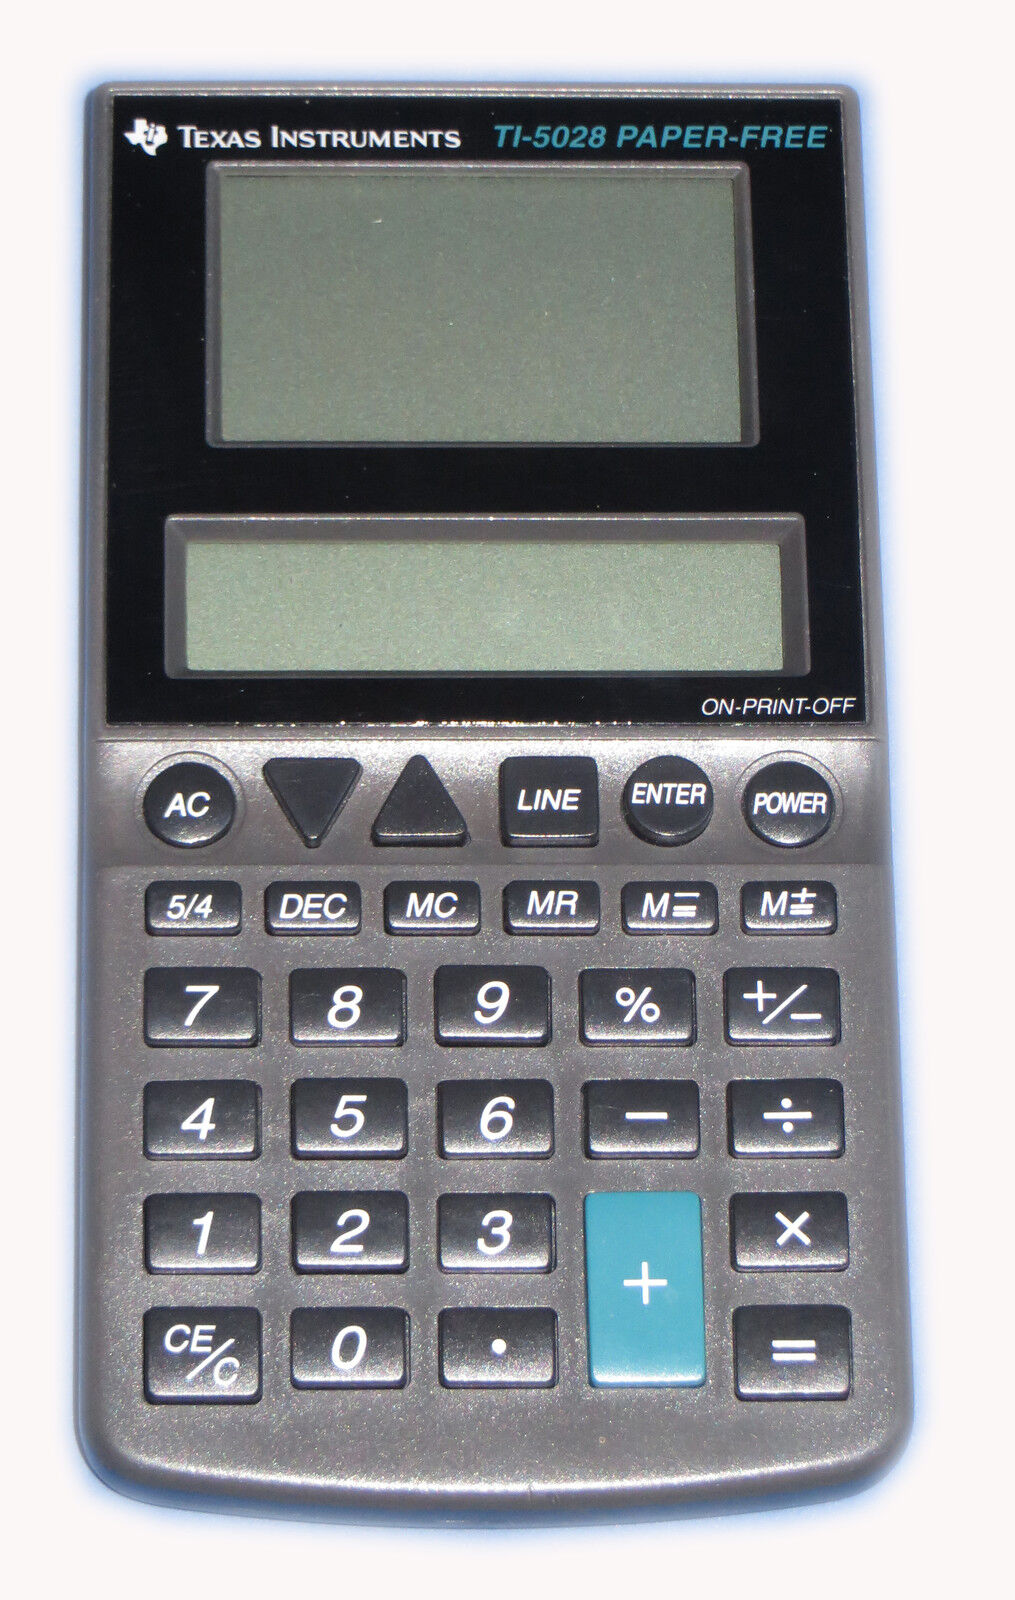 Texas Instruments TI-5028 Spring new work one after another Paper Indefinitely #30 Free Calculator